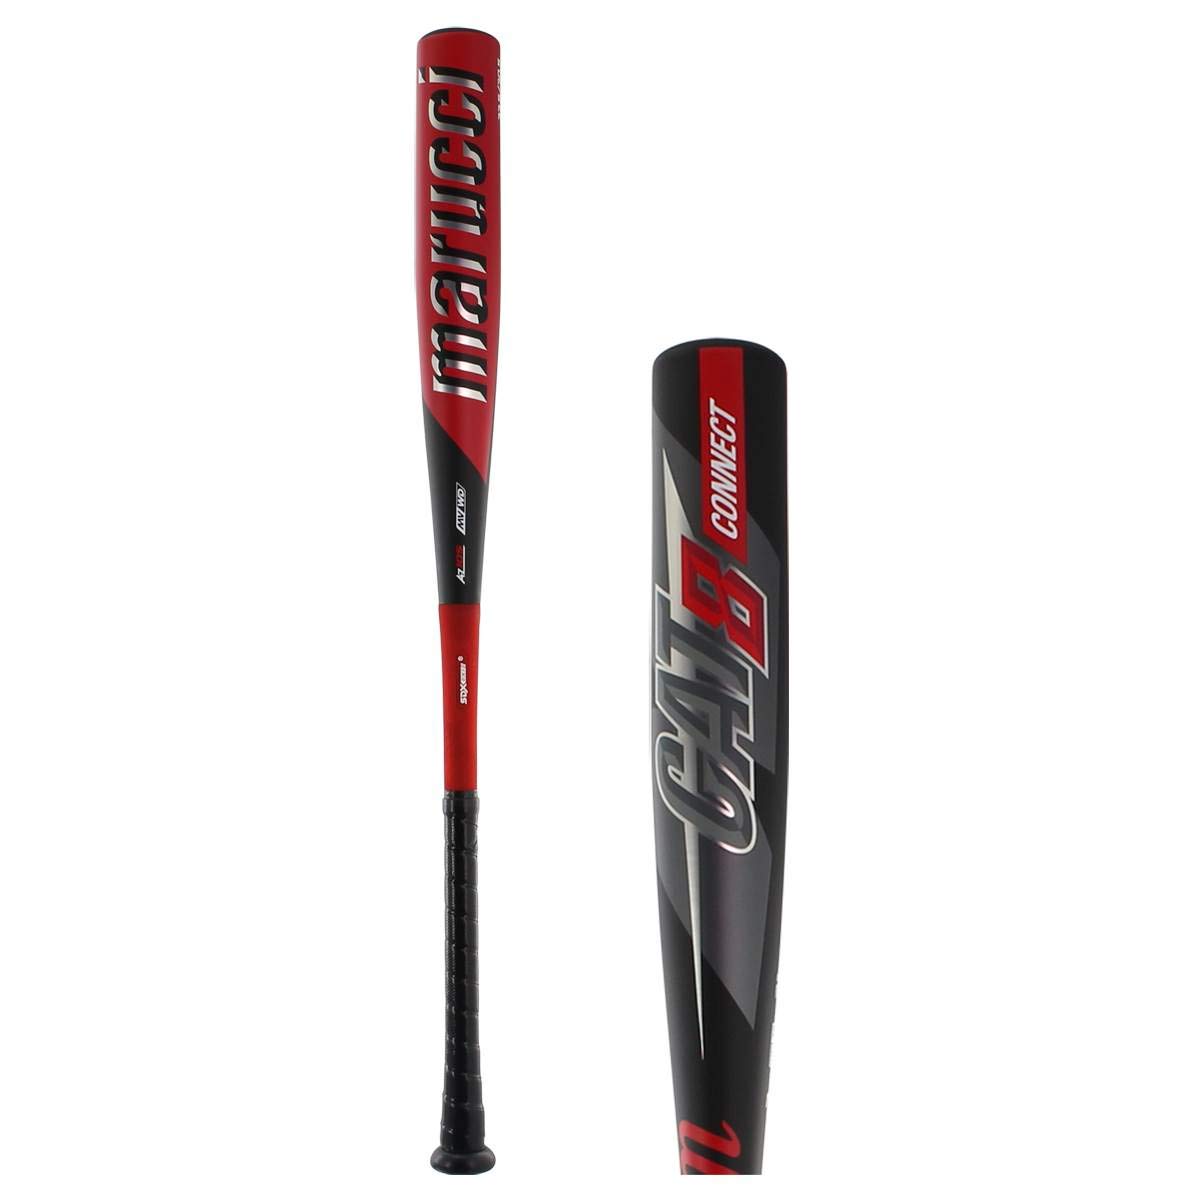 2 5/8 Inch Barrel Diameter -3 Length to Weight Ratio AZ105 Alloy, The Strongest Aluminum On The Marucci Bat Line, Allows For Thinner Barrel Walls, A Higher Response Rate And Better Durability BBCOR Certified Carbon Composite Handle / AZ105 Alloy Barrel.